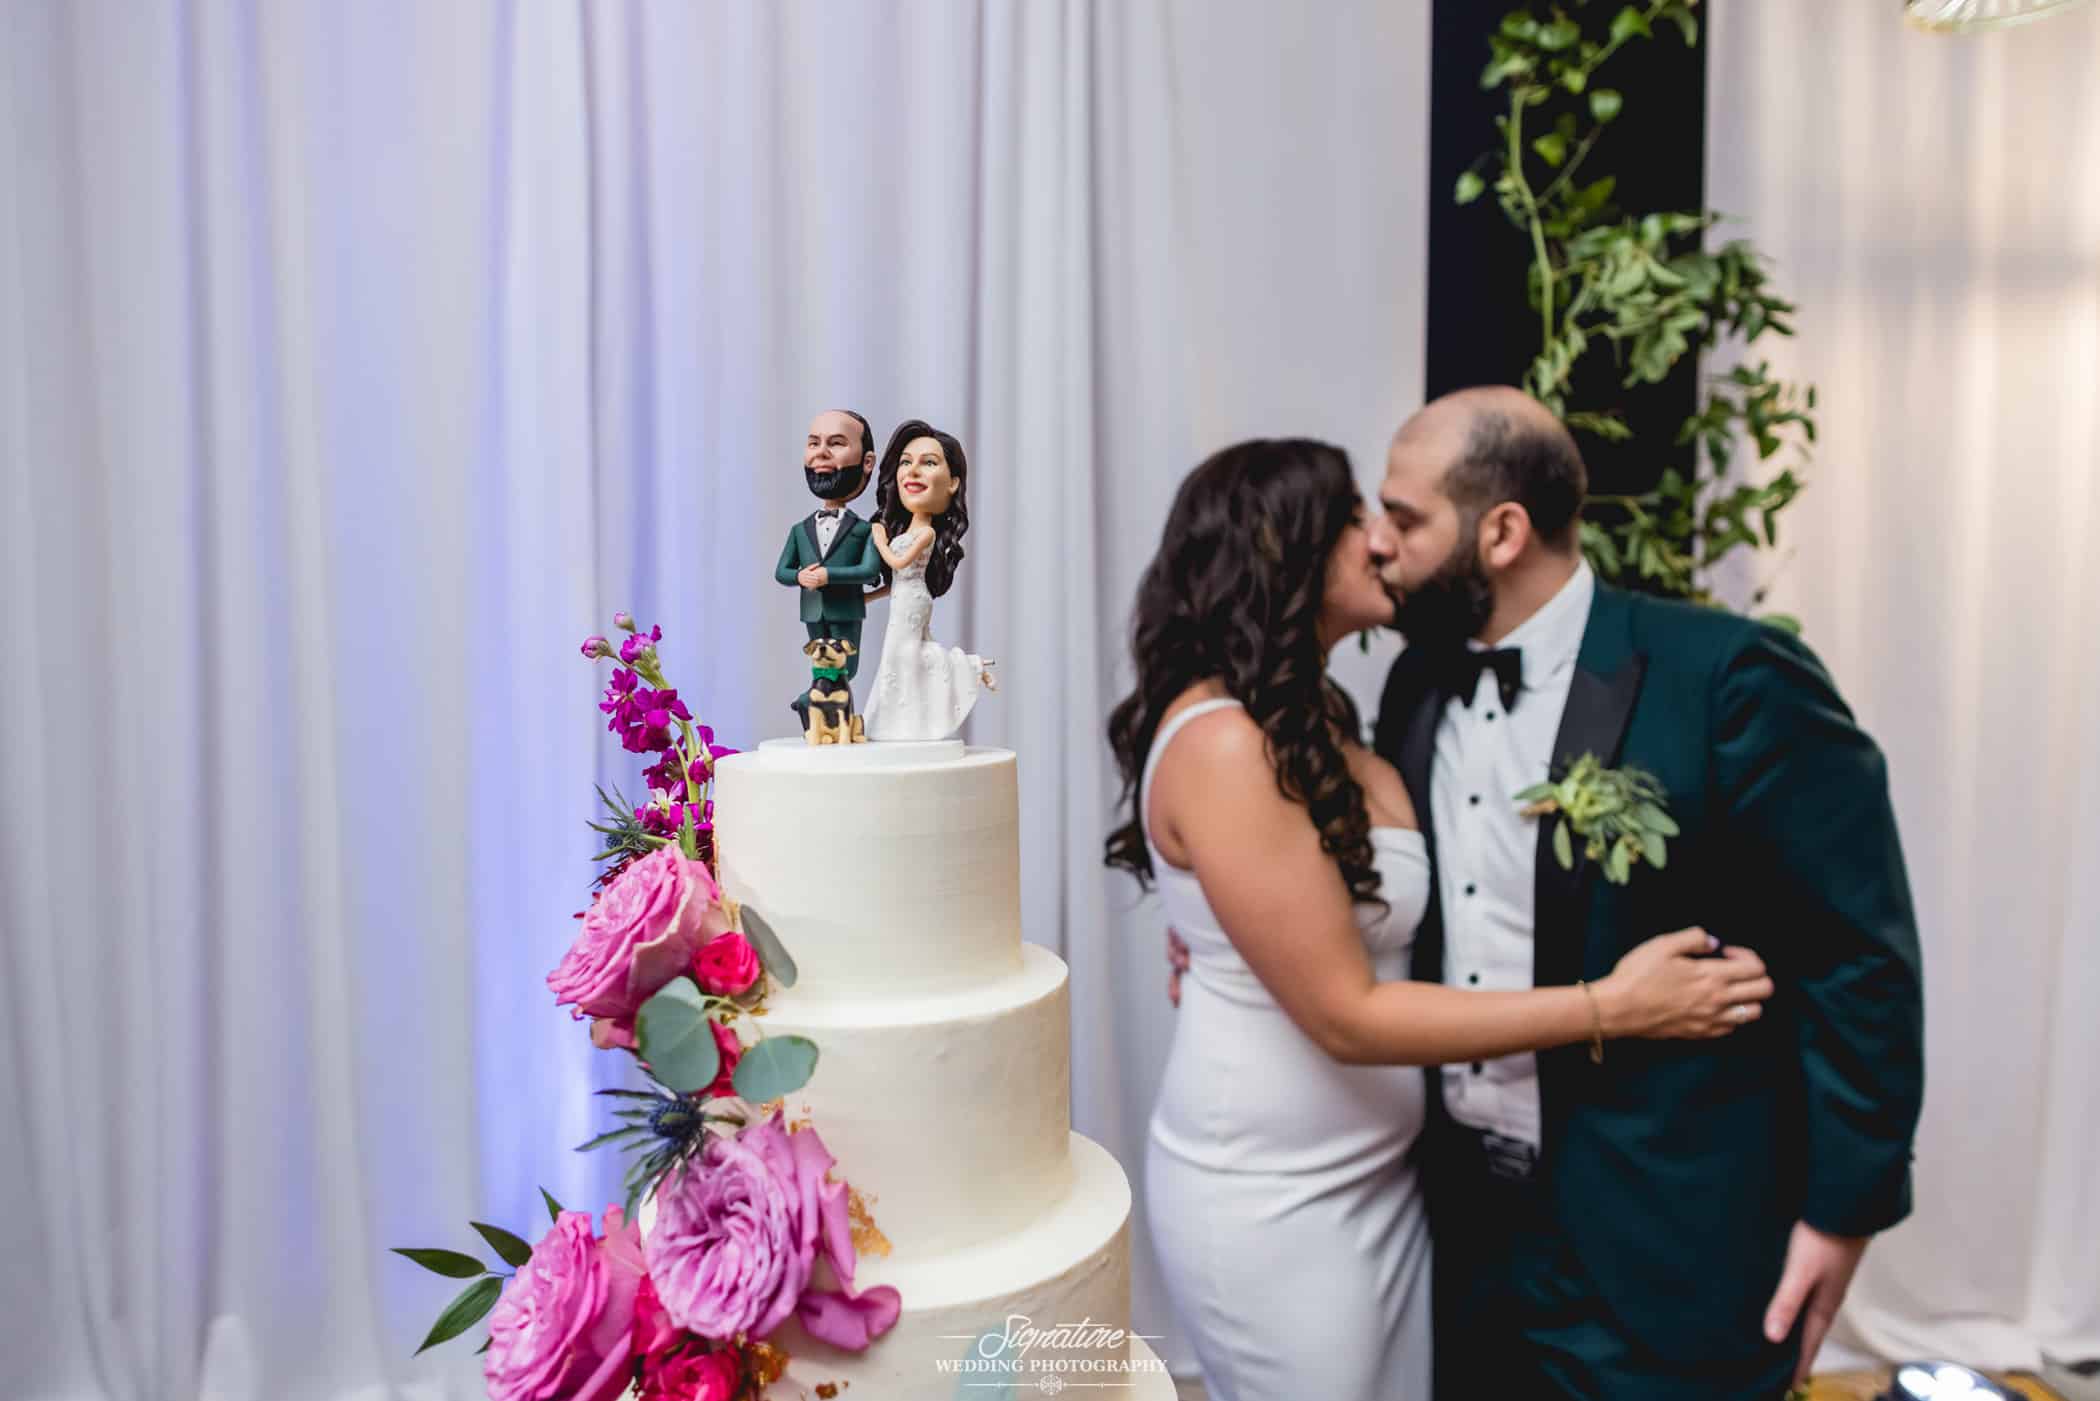 Bride and groom kissing next to wedding cake